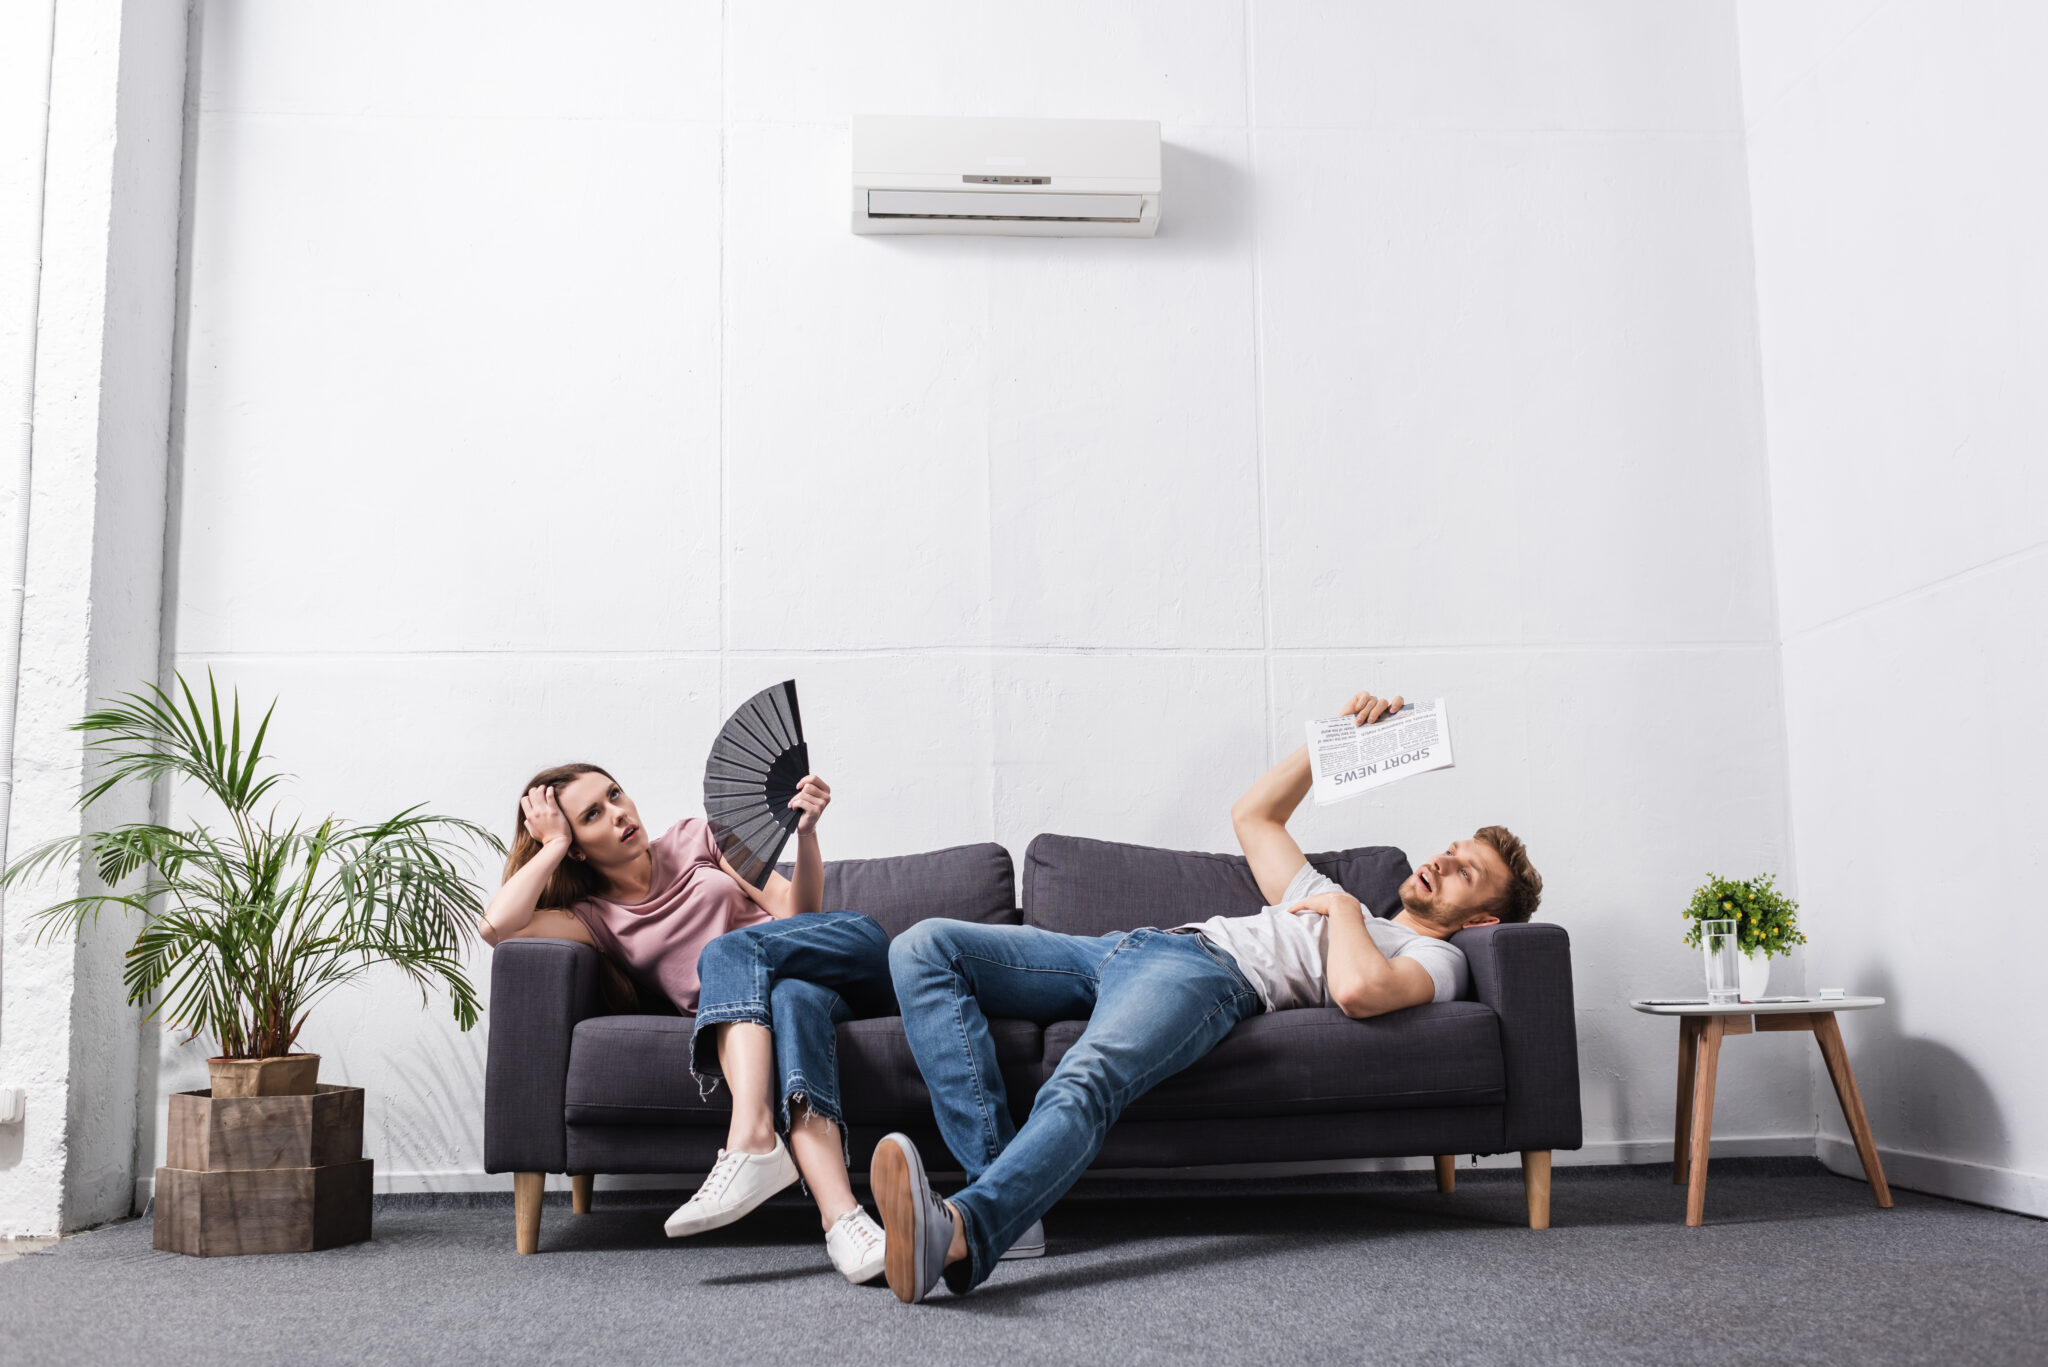 Common Reasons for Air Conditioner Failure